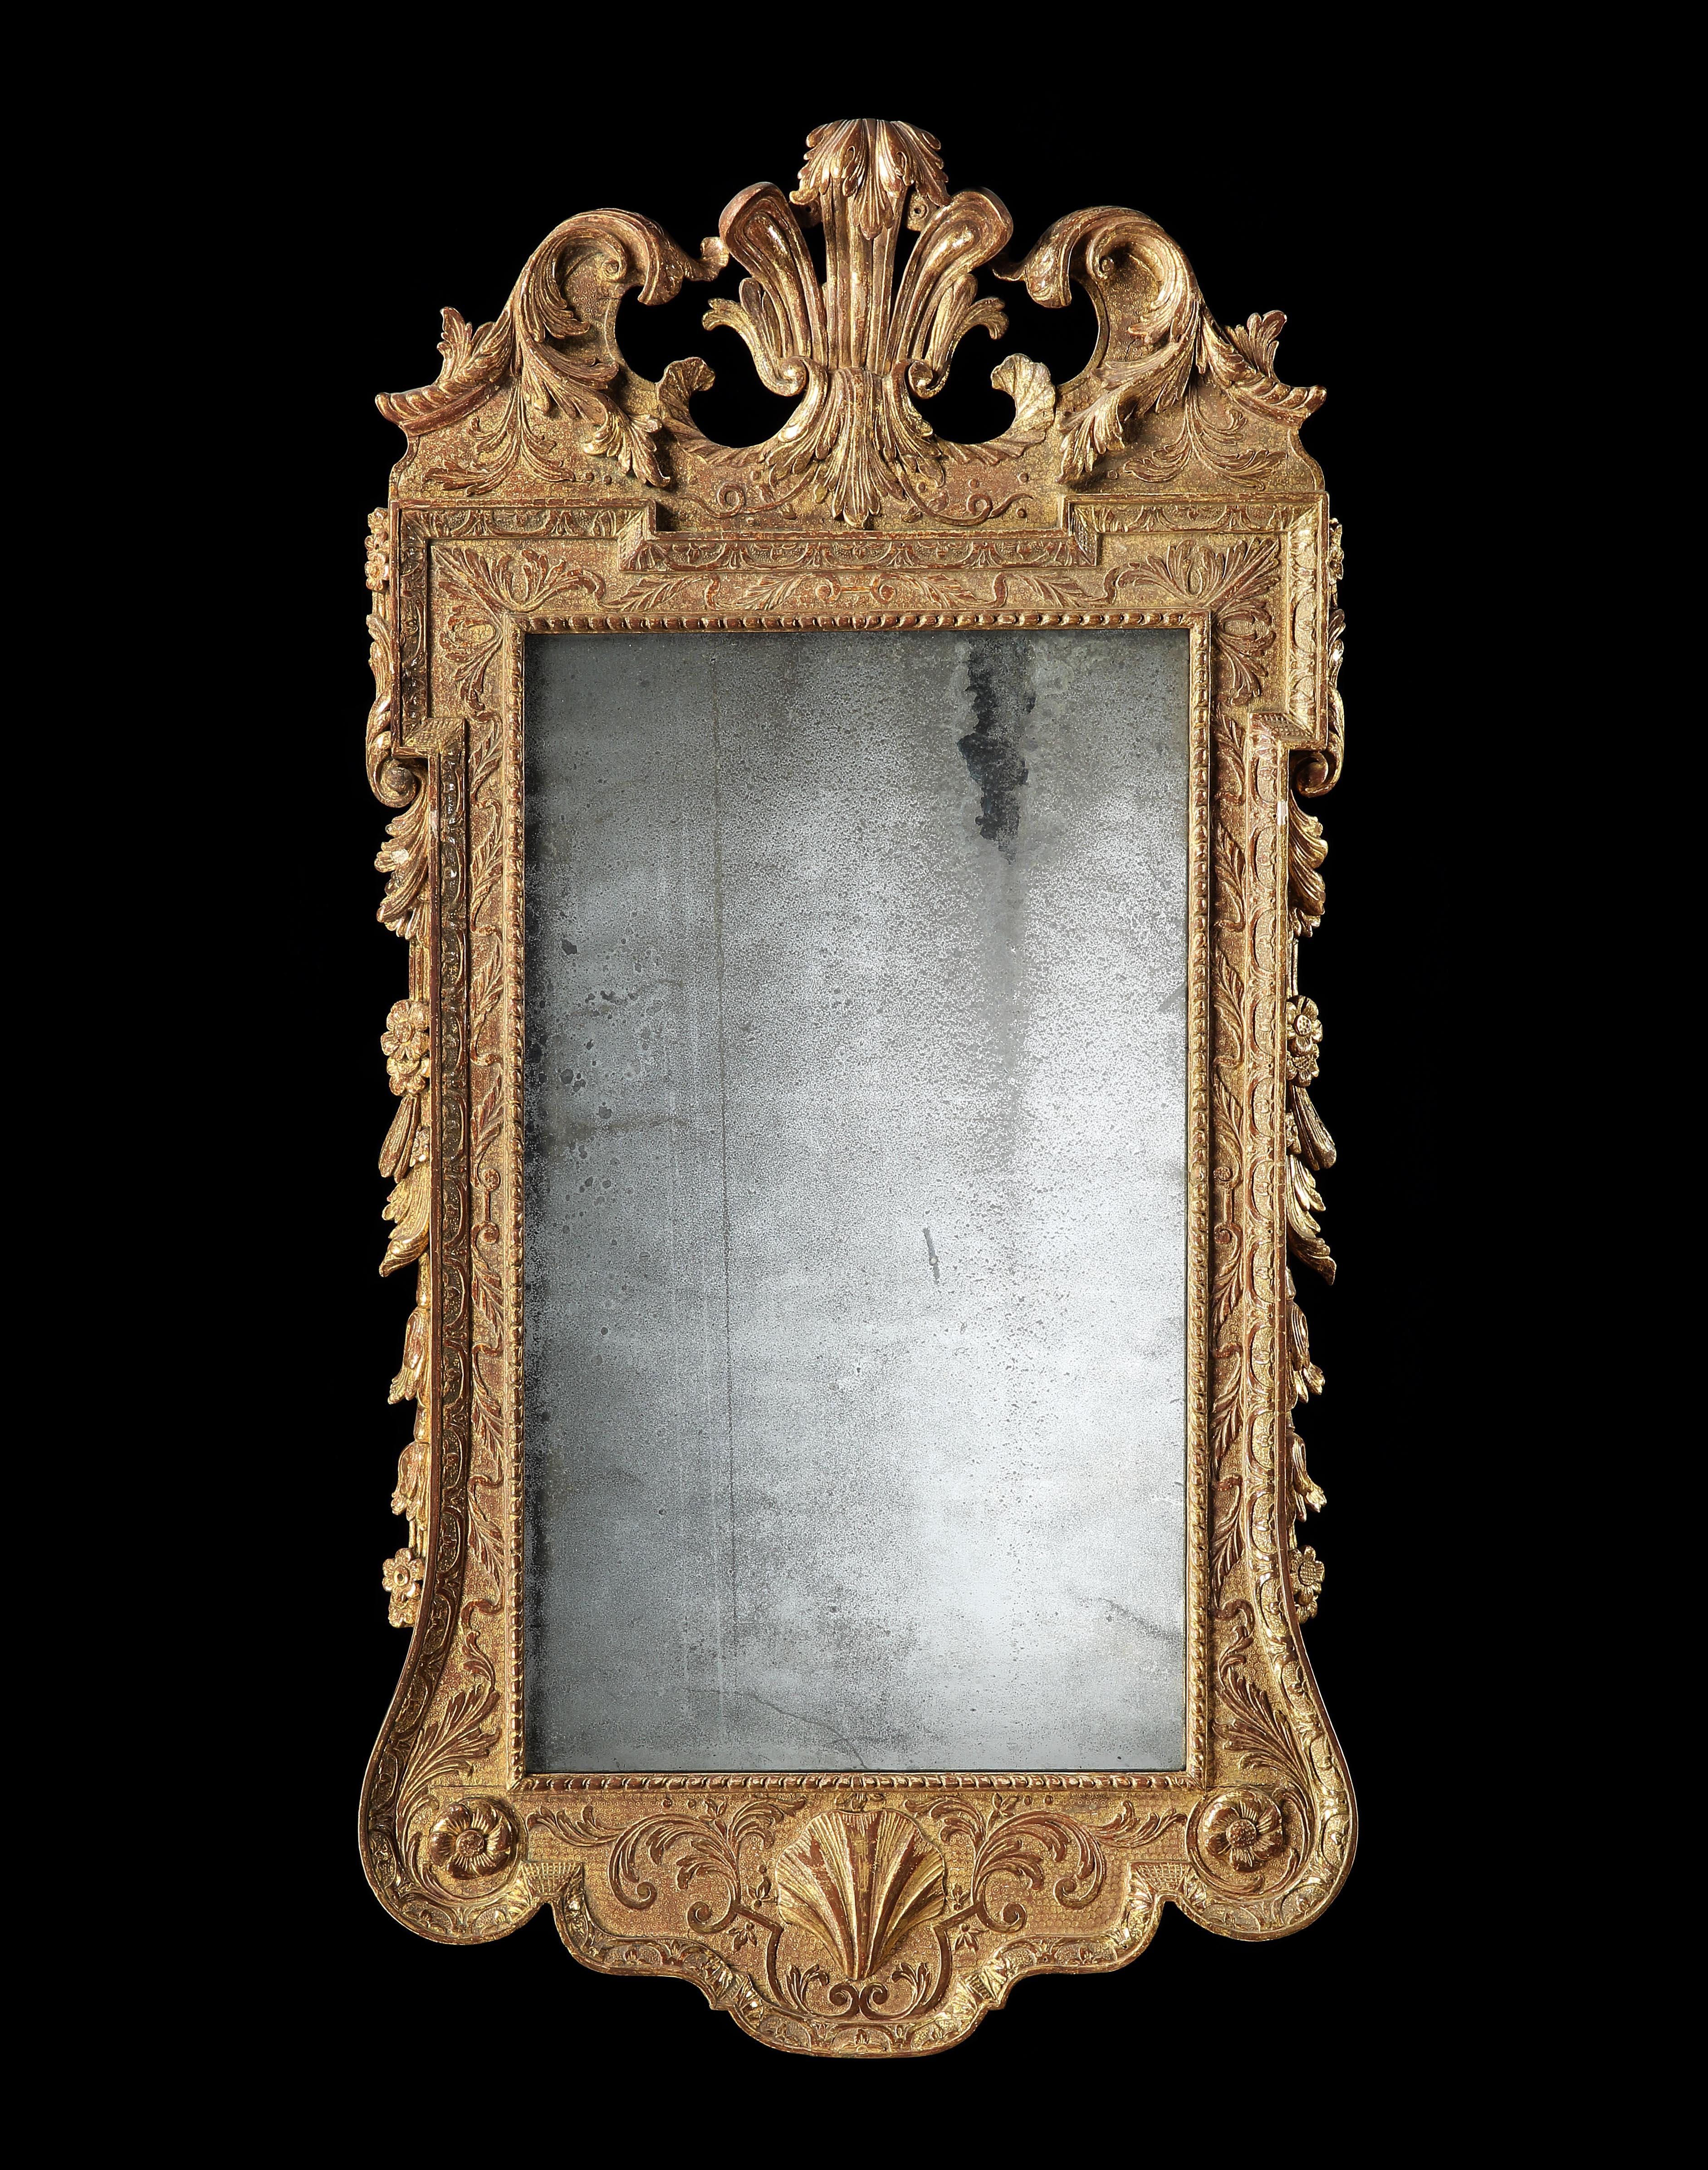 A George II carved and gilded mirror the shaped top centred by a shell, above the original mirror plate inset by a boarder carved with acanthus leaves and egg and dart carvings, the mirror framed with side swags to both sides depicting rosettes. The